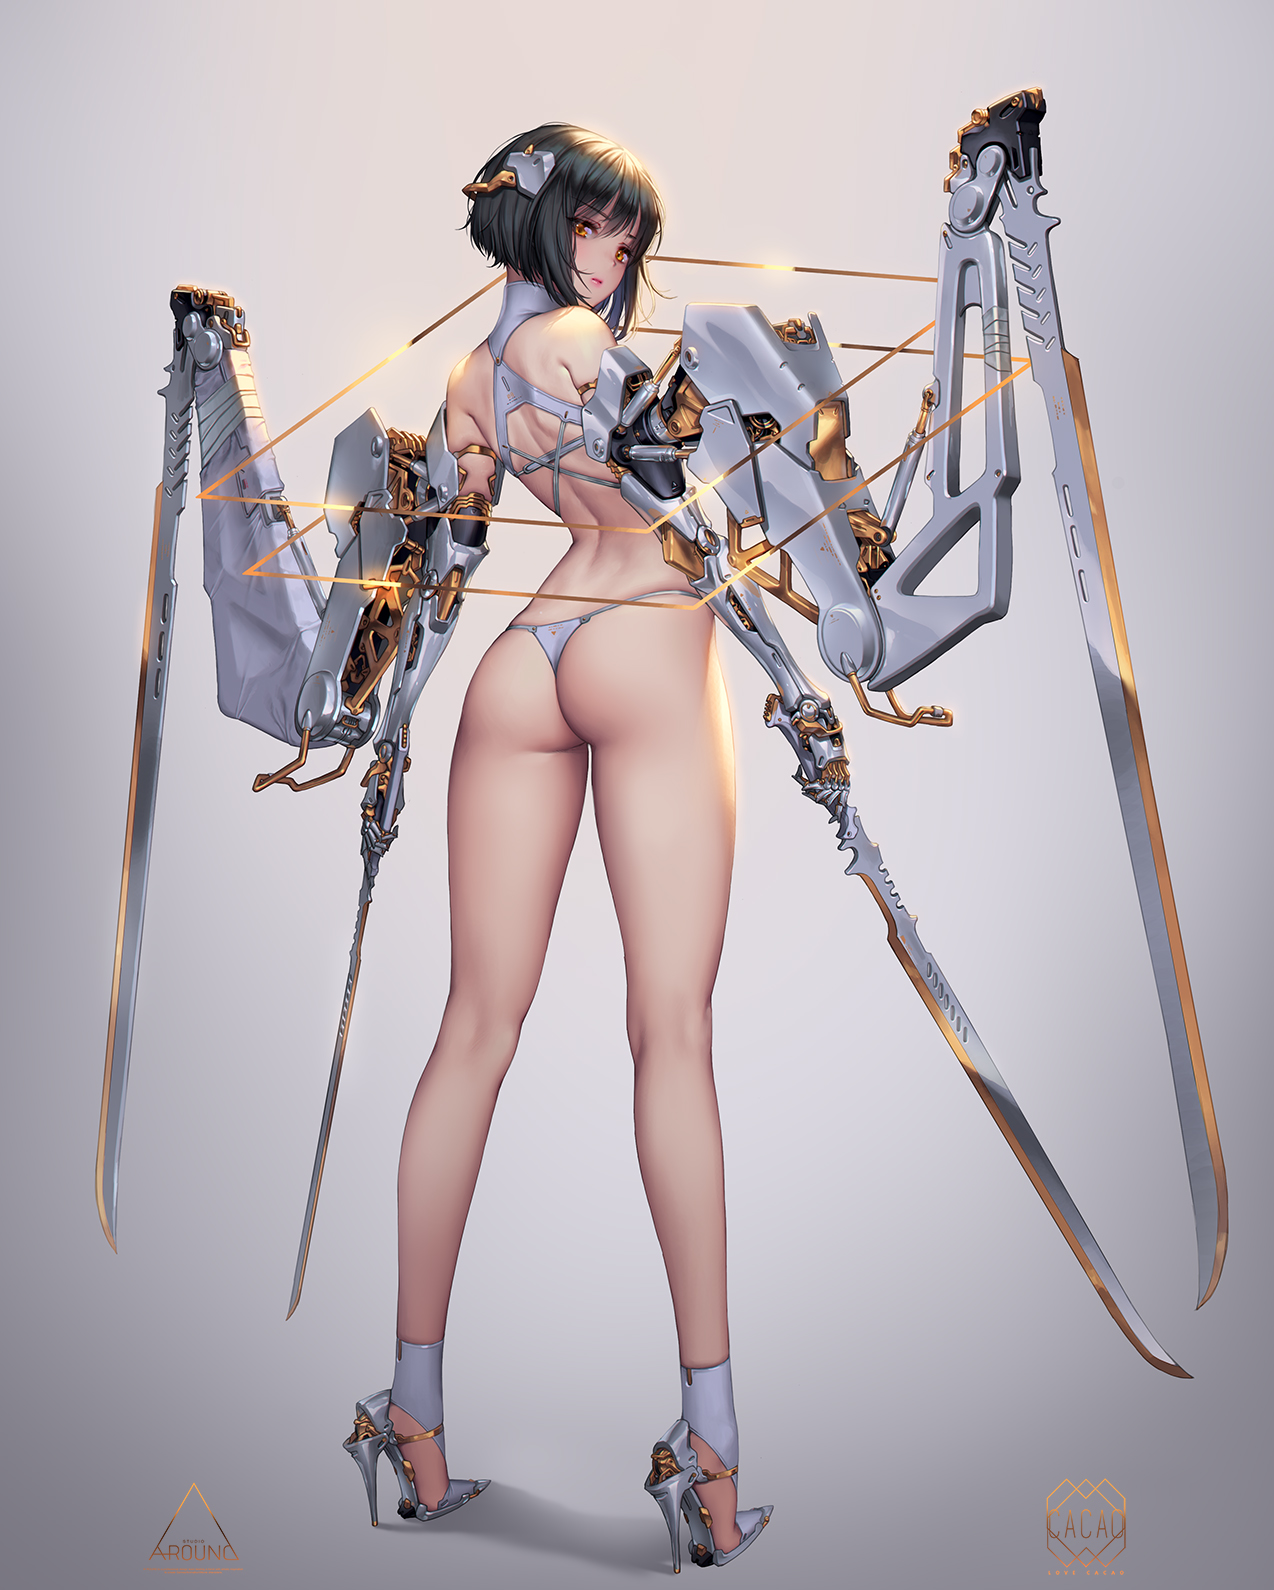 Anime 1274x1590 Lovecacao drawing dark hair hair accessories androids short hair panties ass low-angle high heels weapon sword blades brown eyes anime girls mecha girls